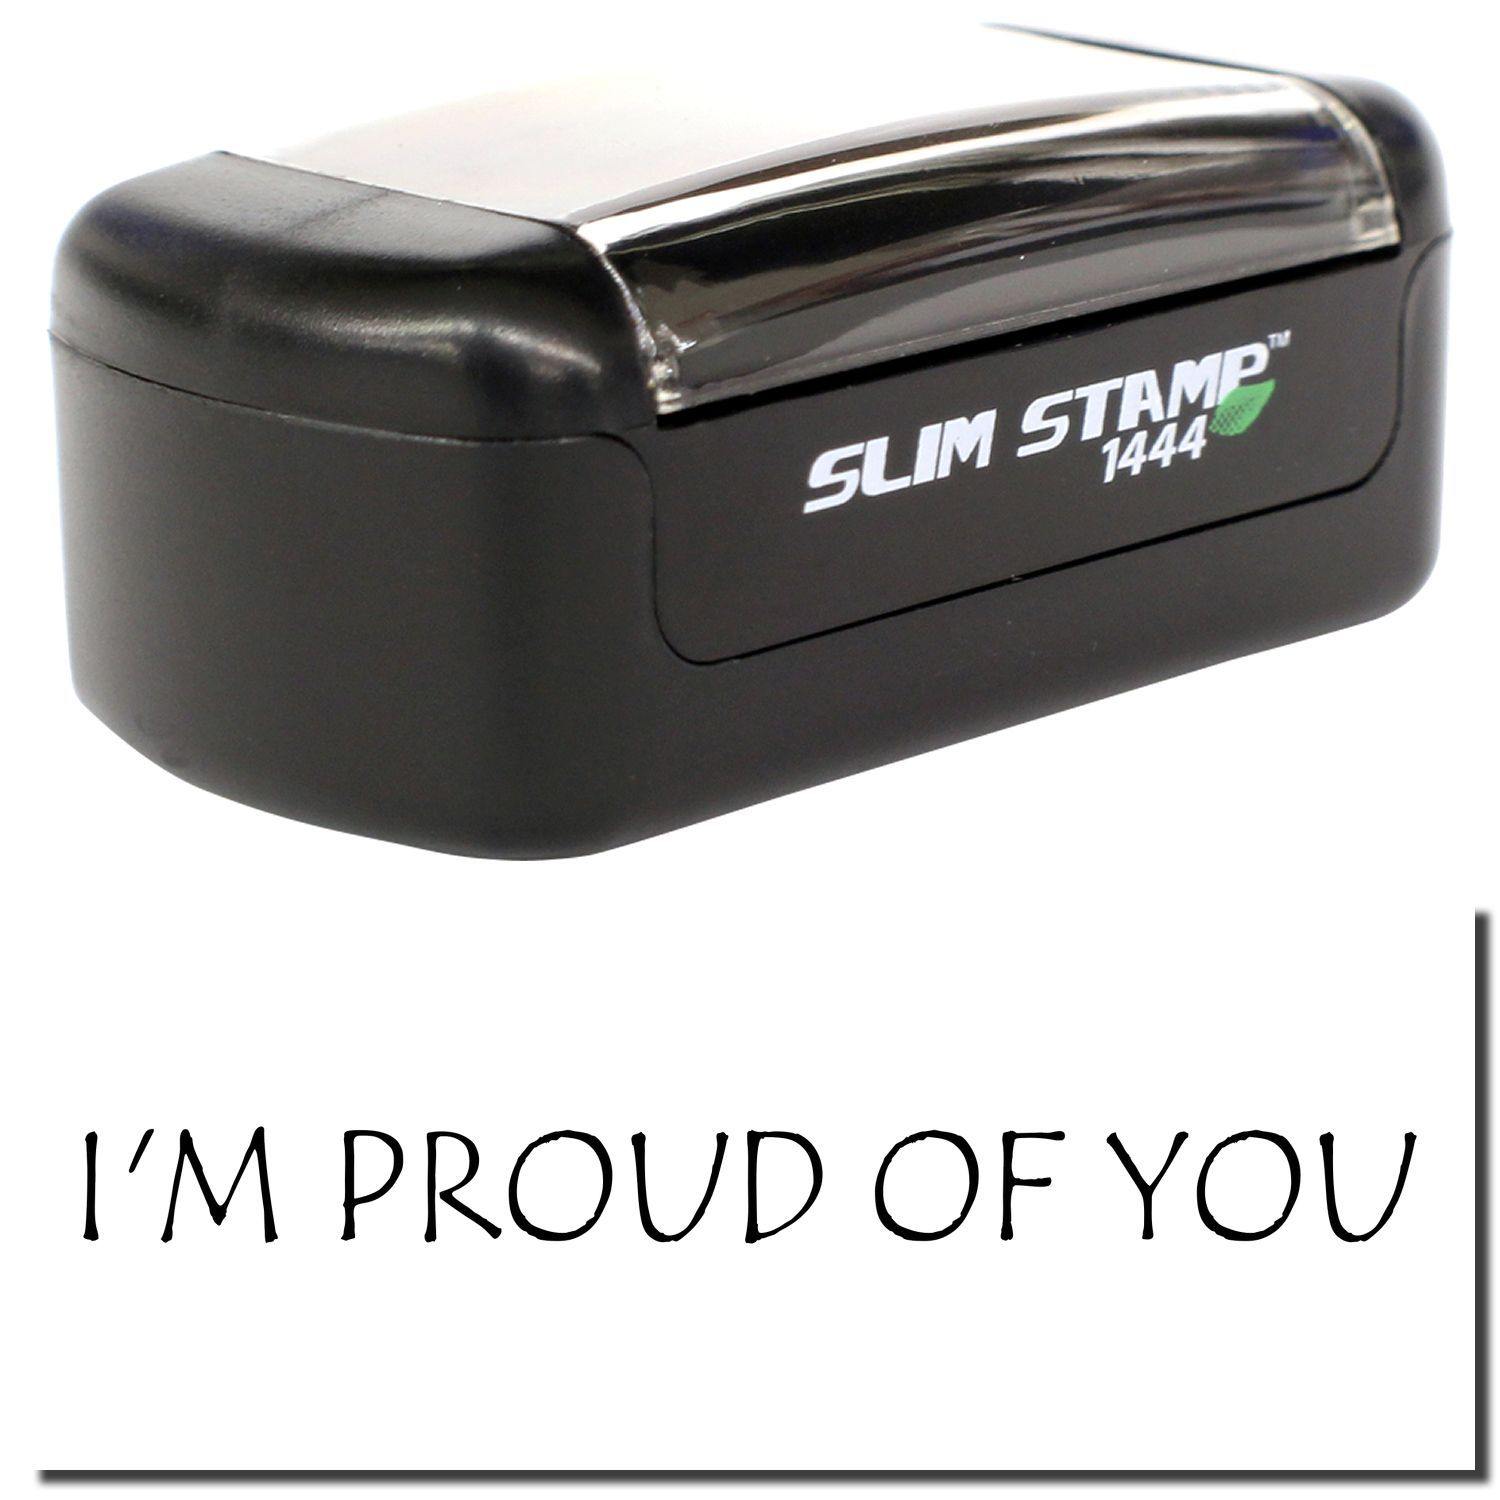 A stock office pre-inked stamp with a stamped image showing how the text "I'M PROUD OF YOU" is displayed after stamping.